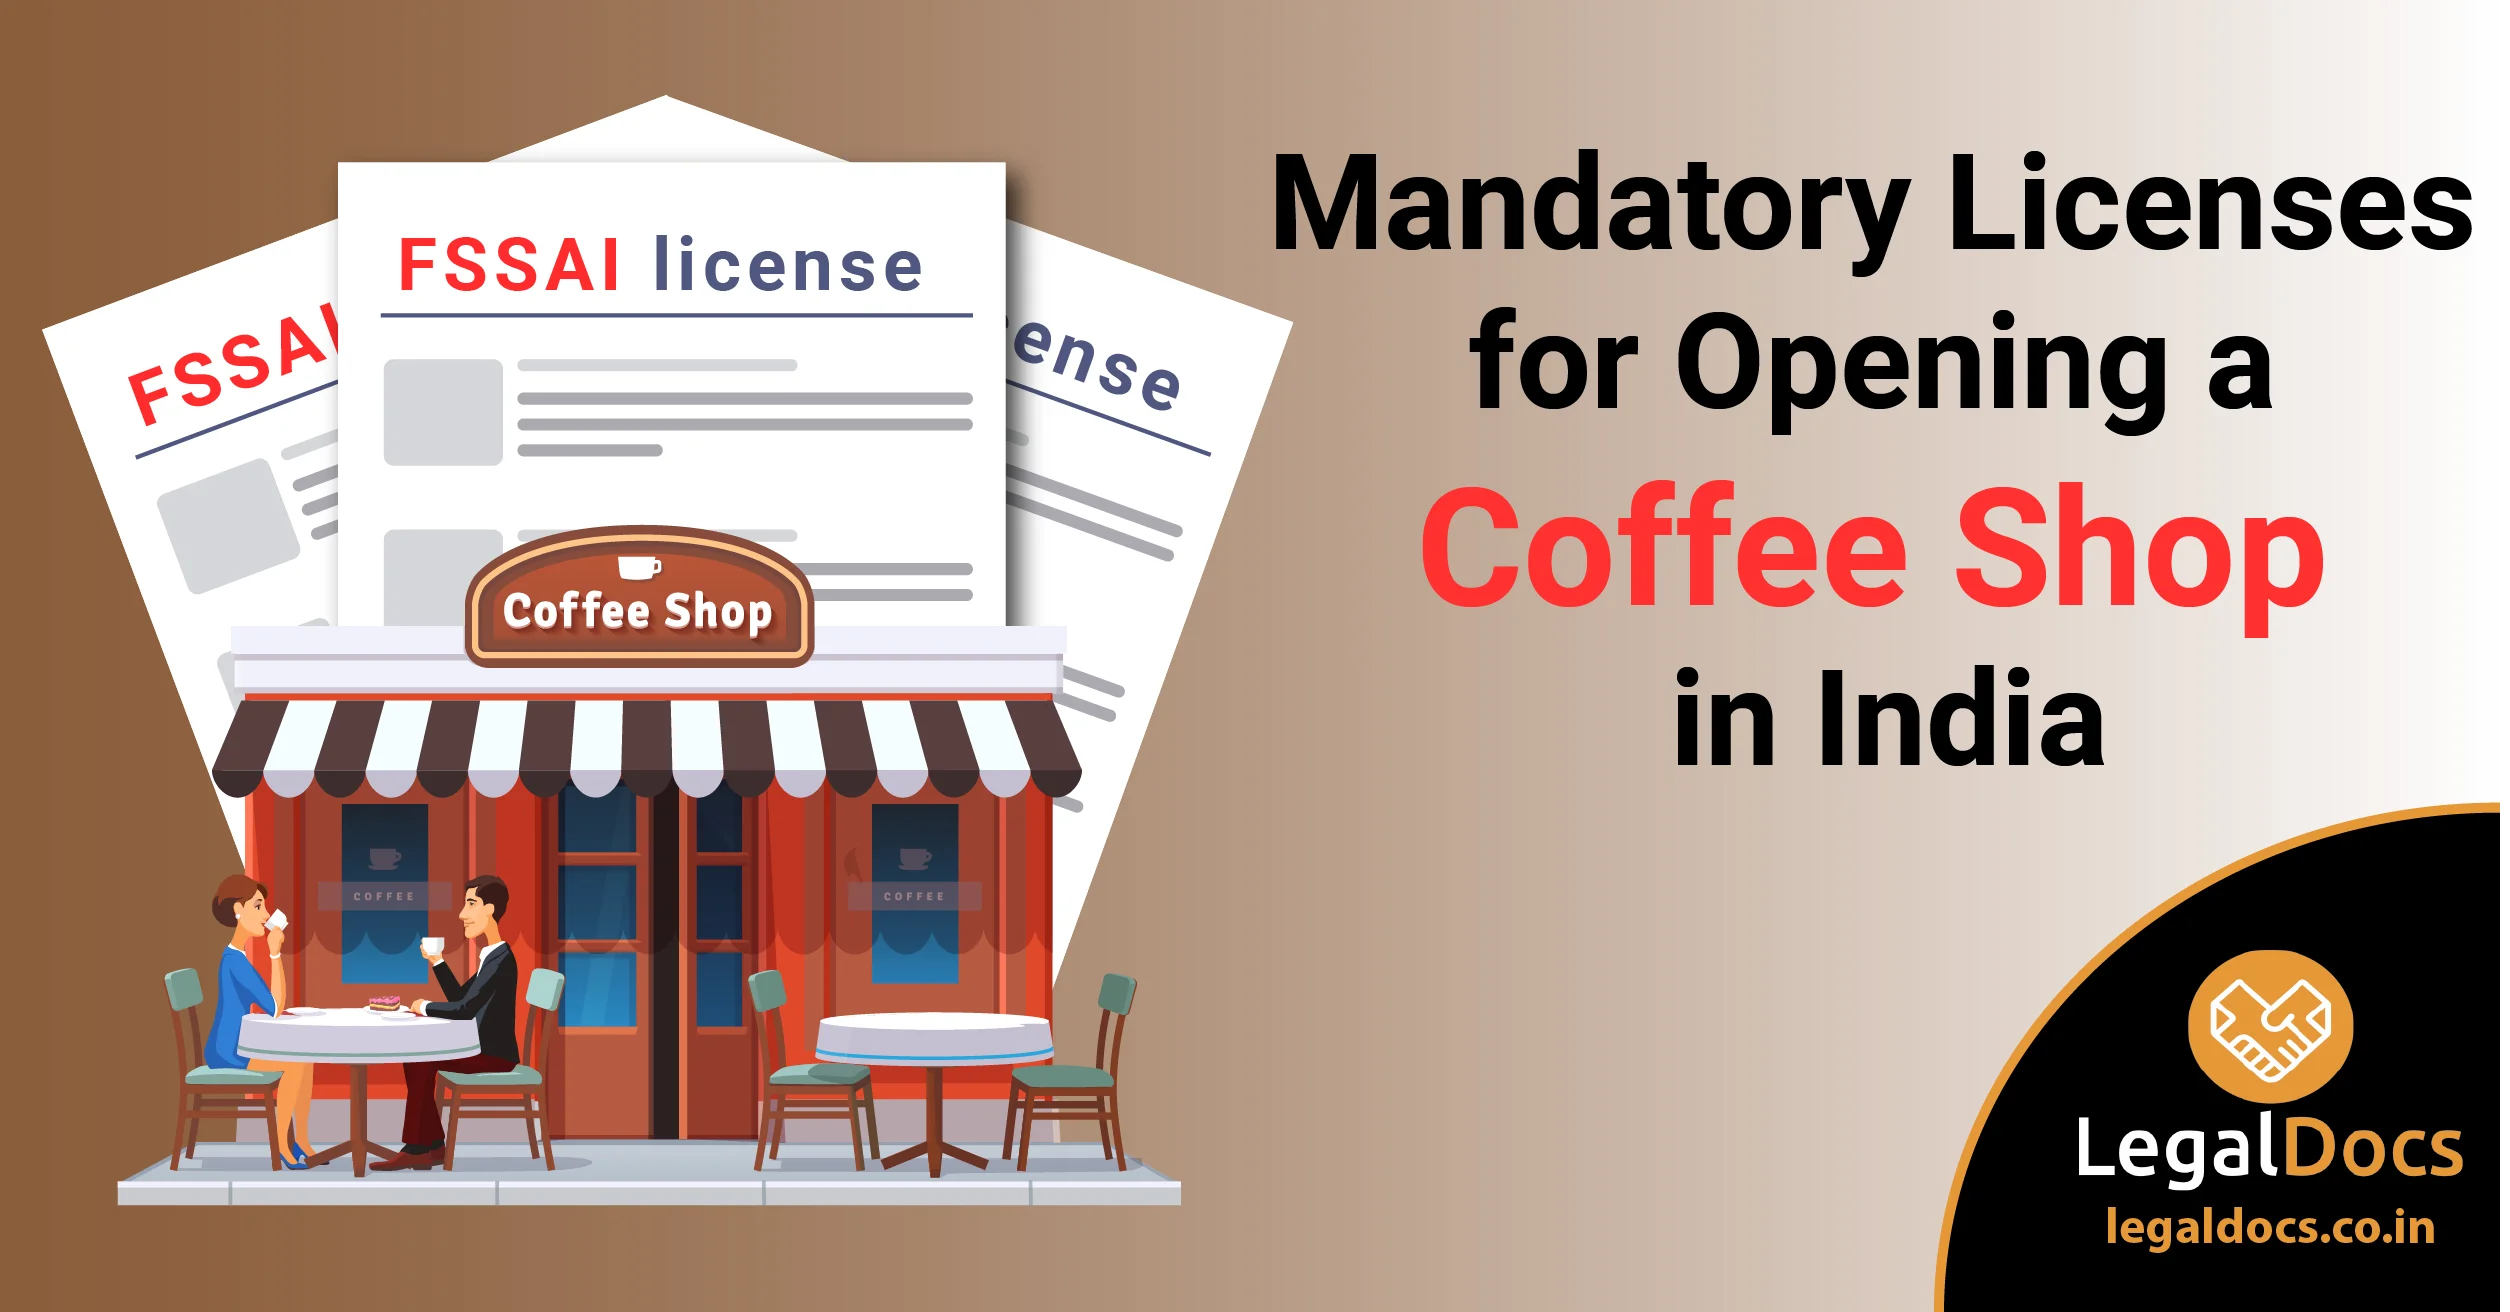 Mandatory Licenses for Opening a Coffee Shop in India - LegalDocs